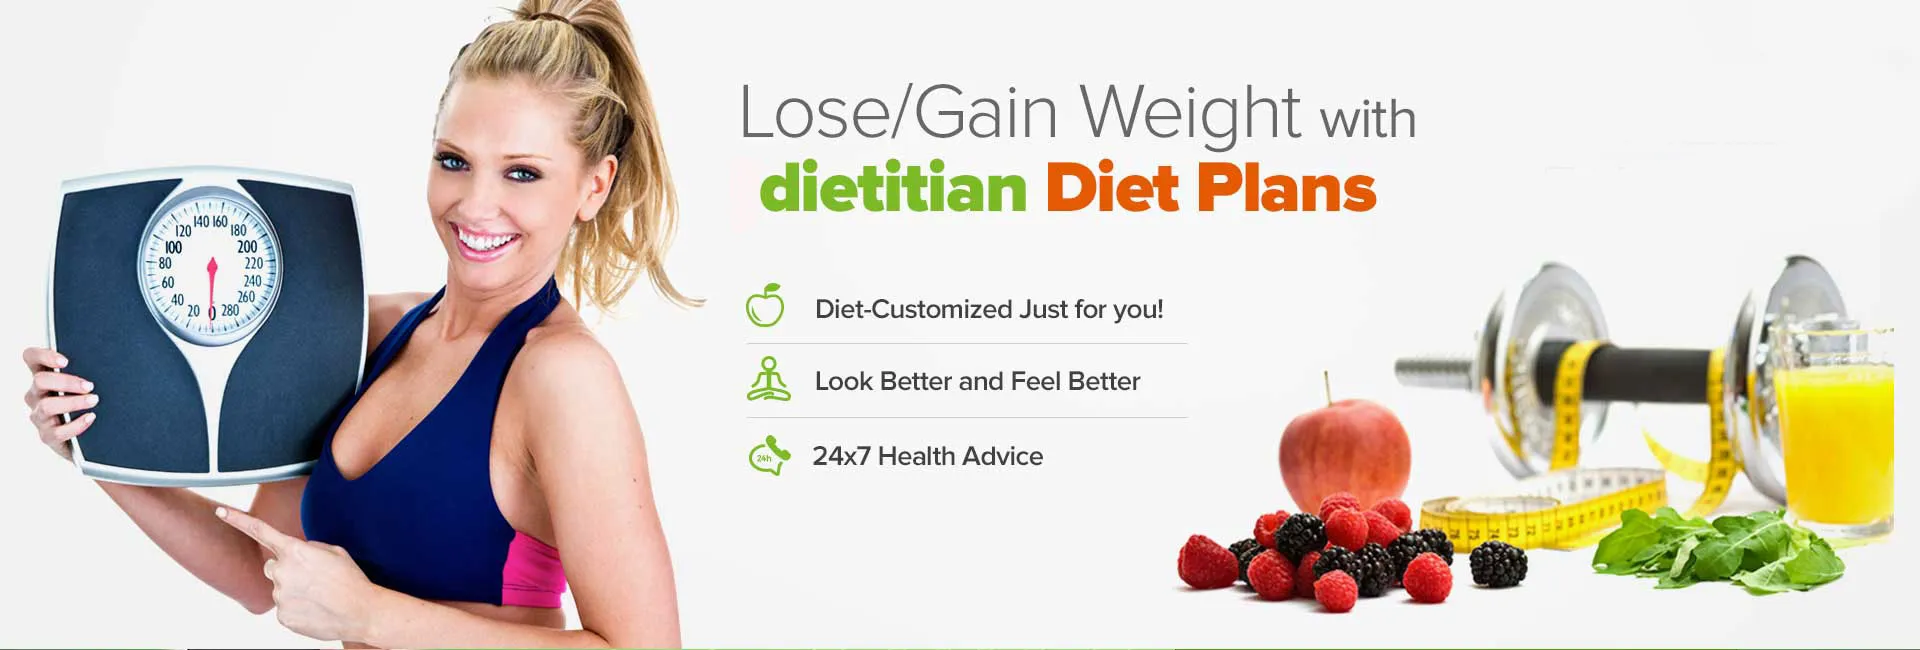 Diet Plan For Weight Loss In Brant